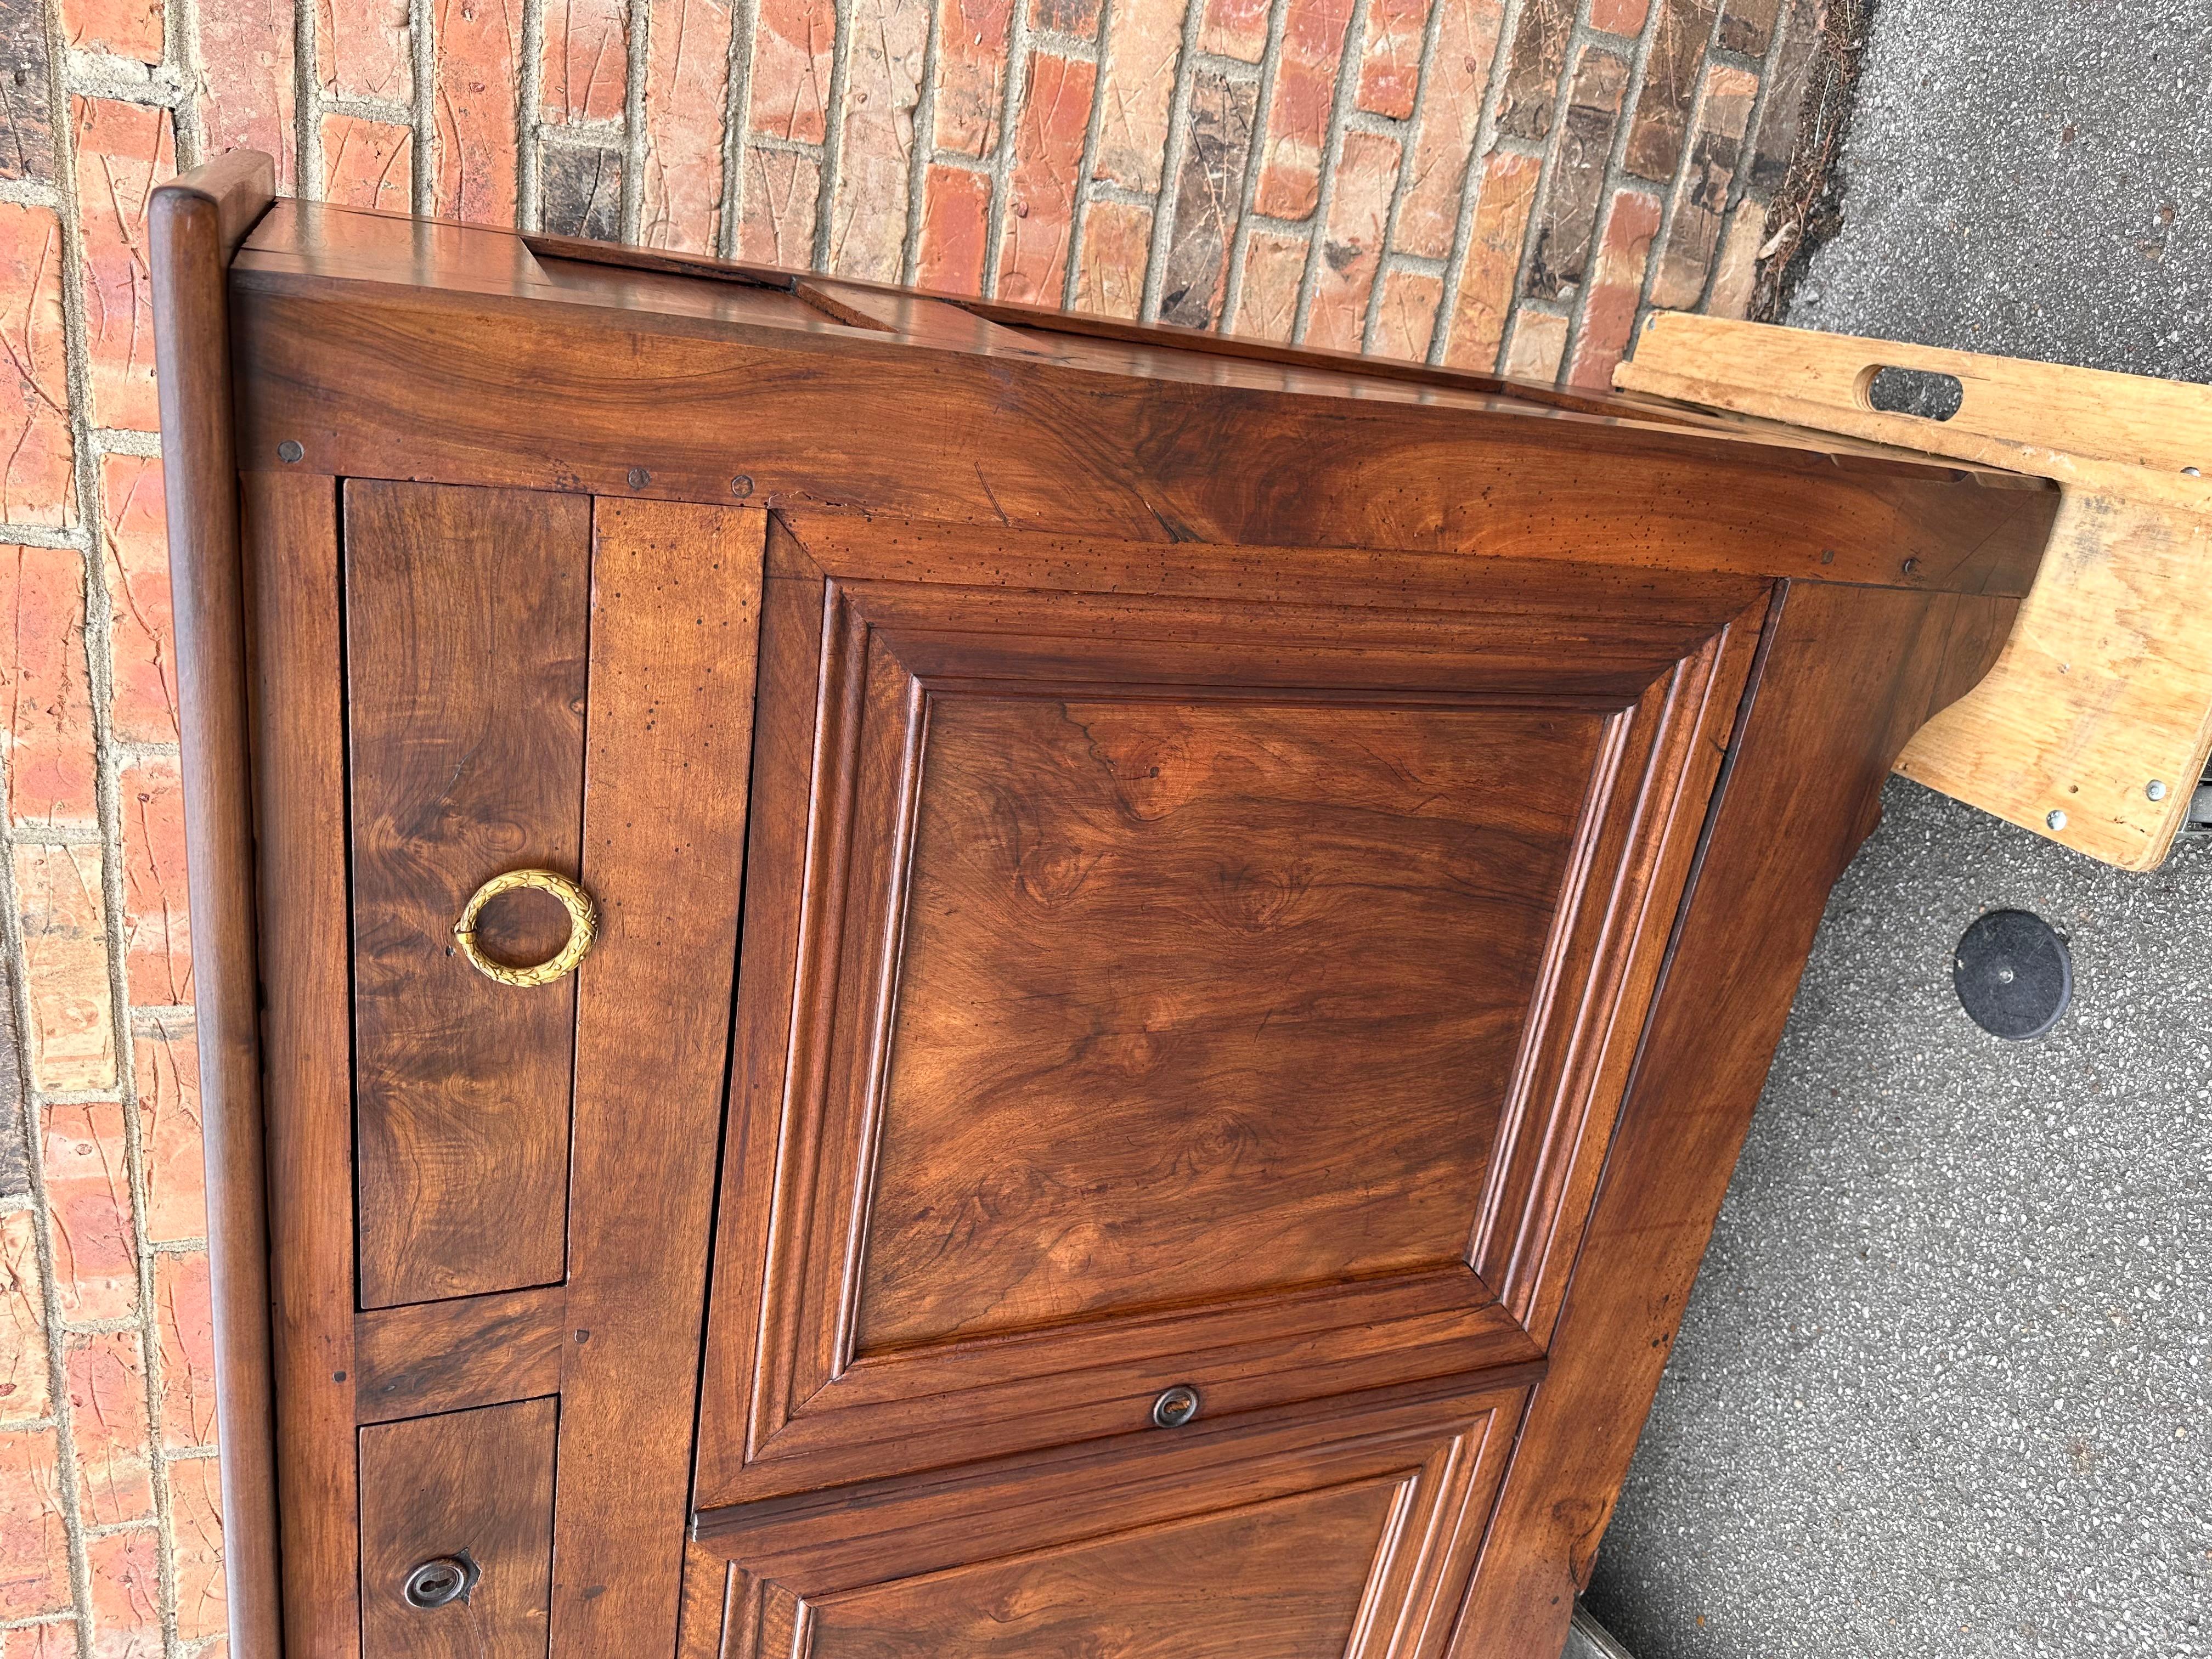 Notice the shallow depth of 16 inches, this is a very unique French server from the mid 19th century in walnut which gives it such a nice warm brown tone. A clean and simple design with two drawers over two doors that both open to ample amount of